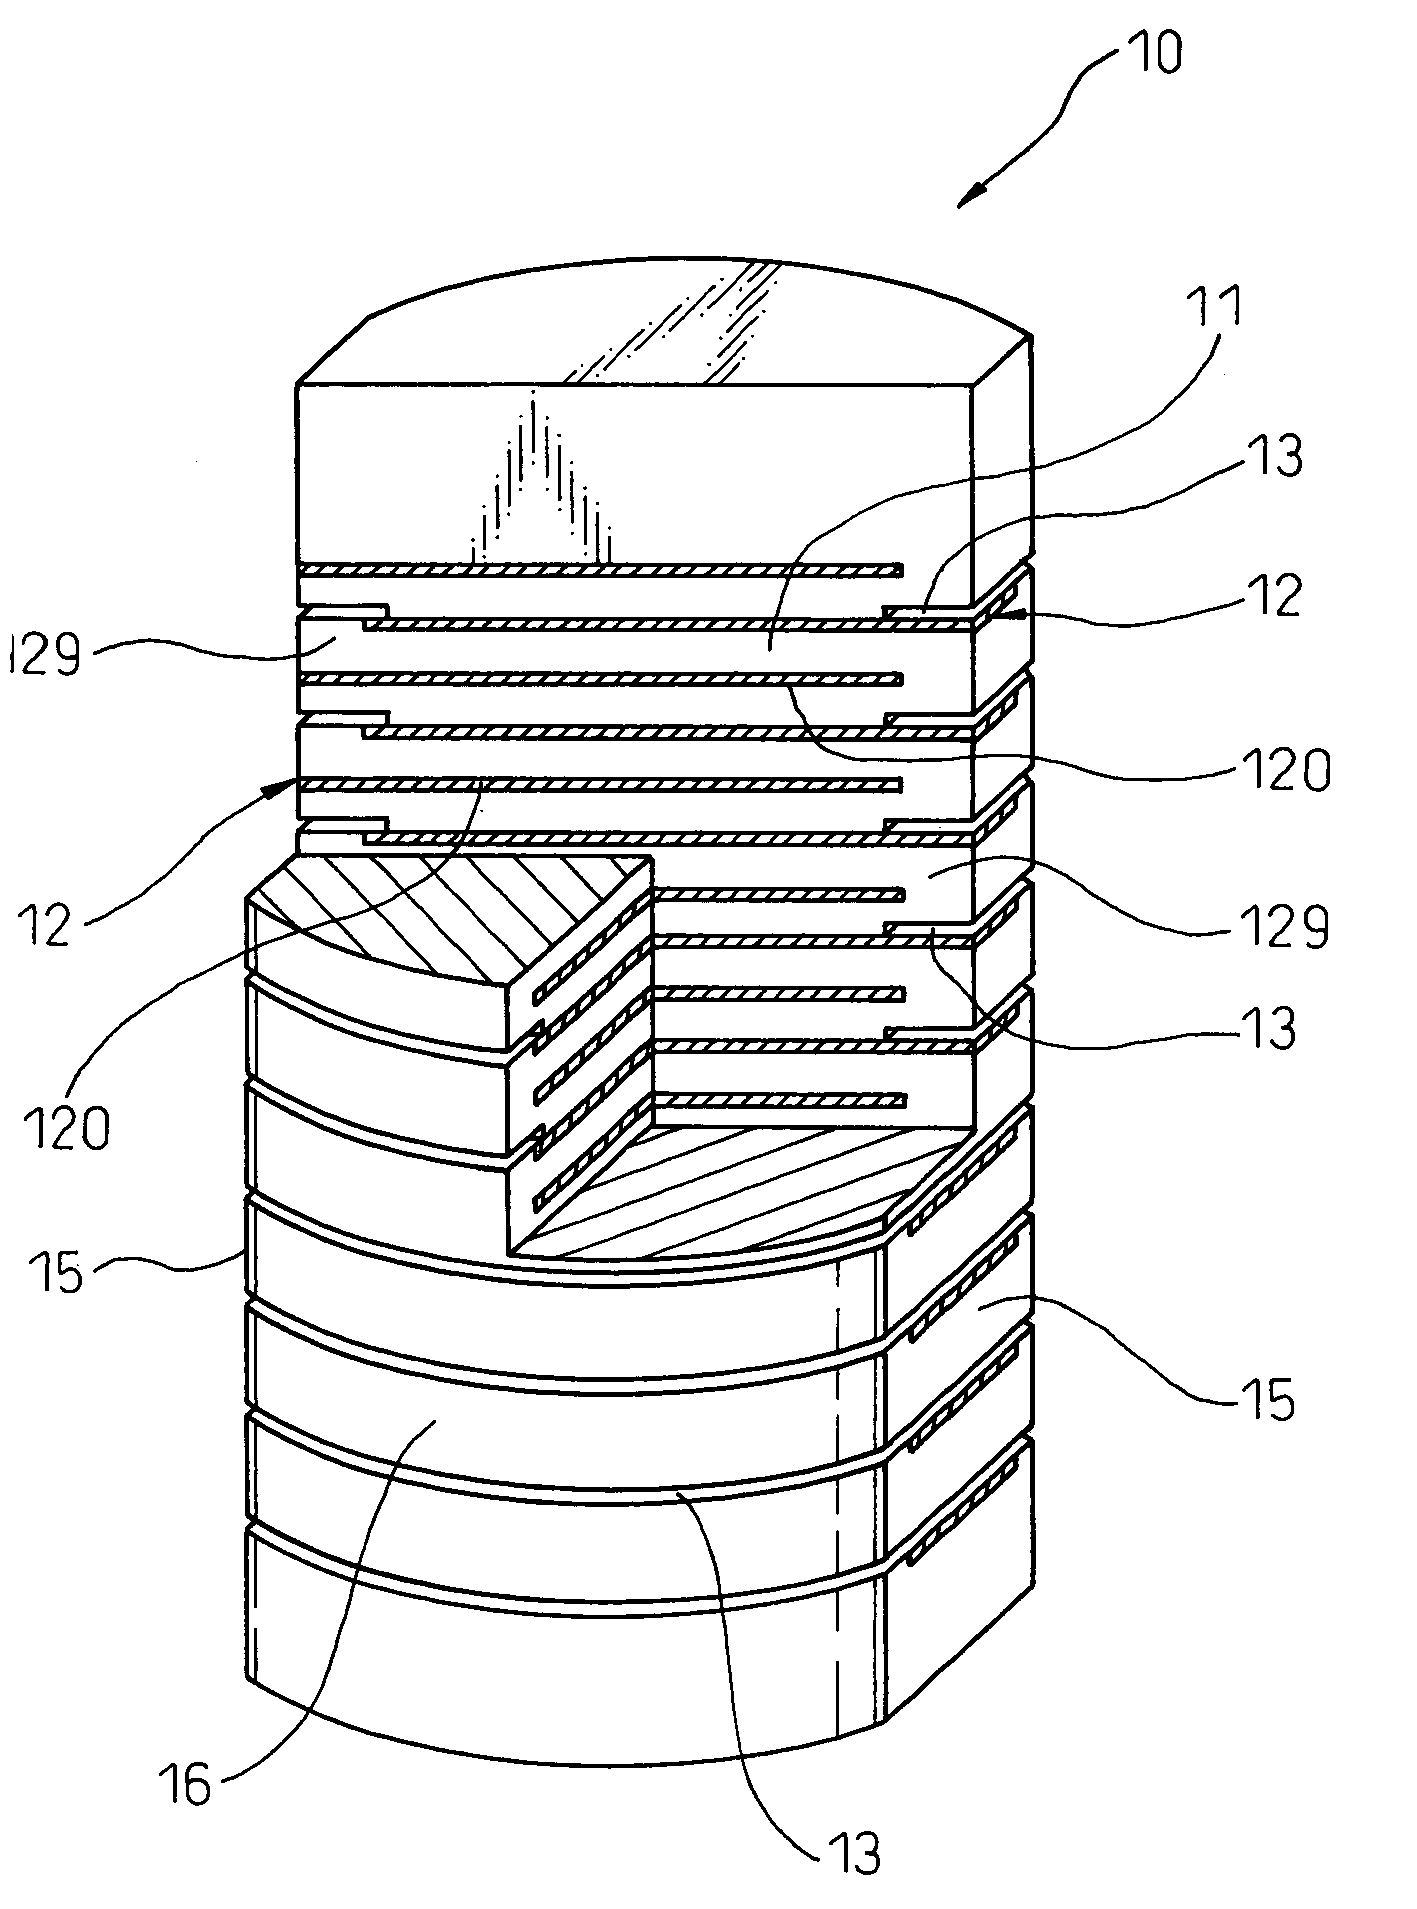 Laminated-type piezoelectric element and a manufacturing method thereof